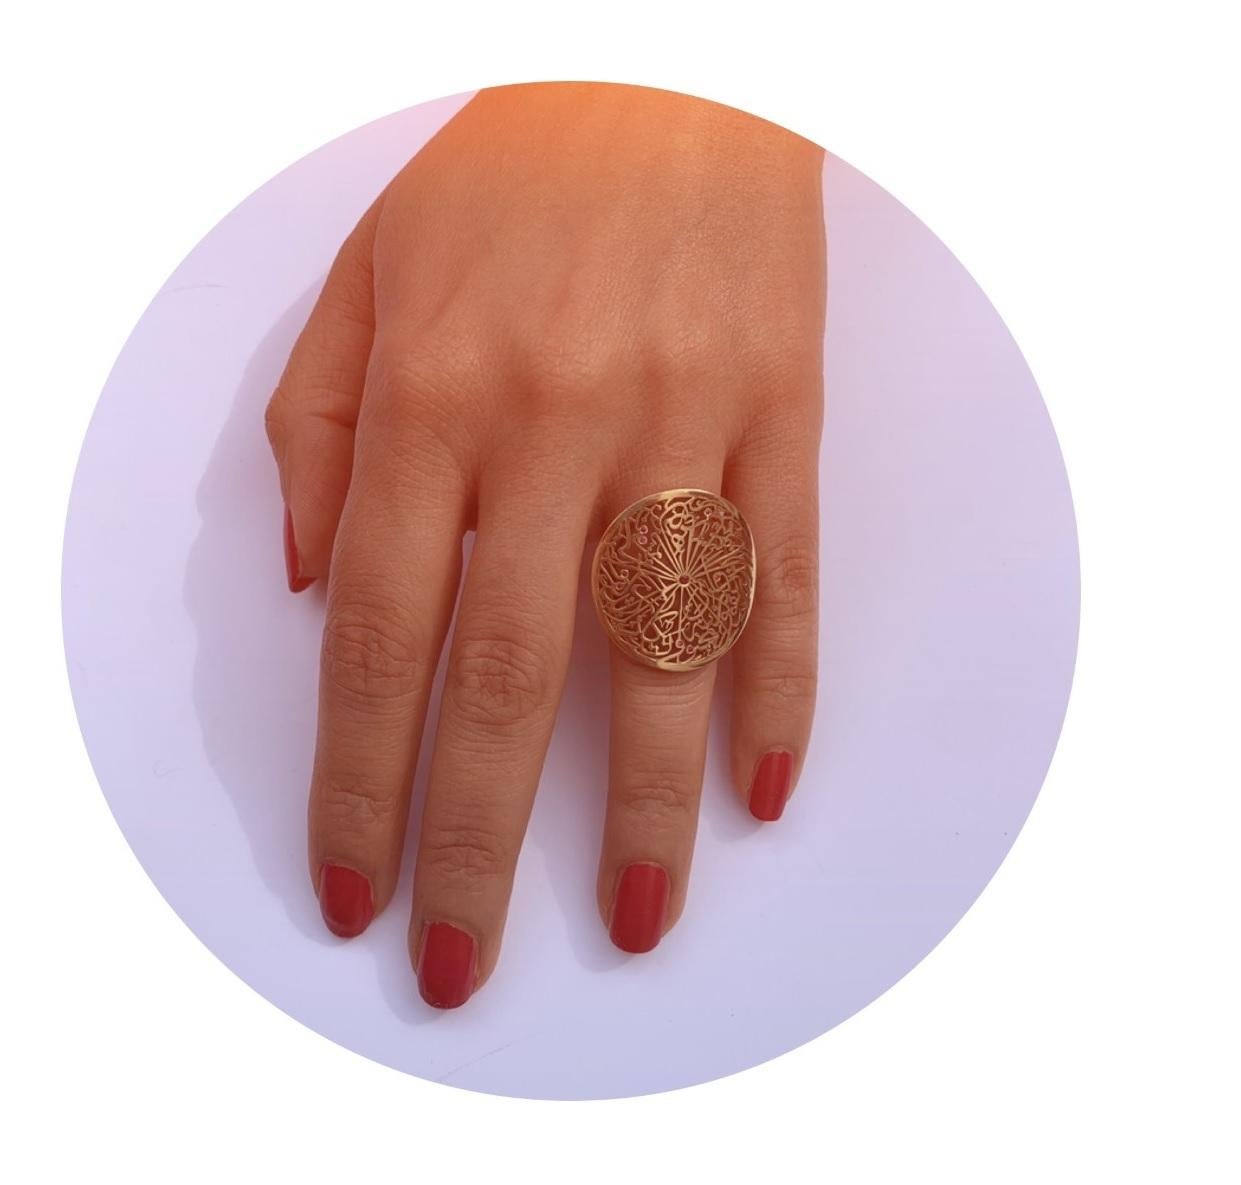 From the Parisa London Collection, this artistically stylised handmade filigree ring is crafted in 18 karat gold with contemporary shiny finish, set intricately with round cut rubies in a bezel type setting on the top of some of the letters. The